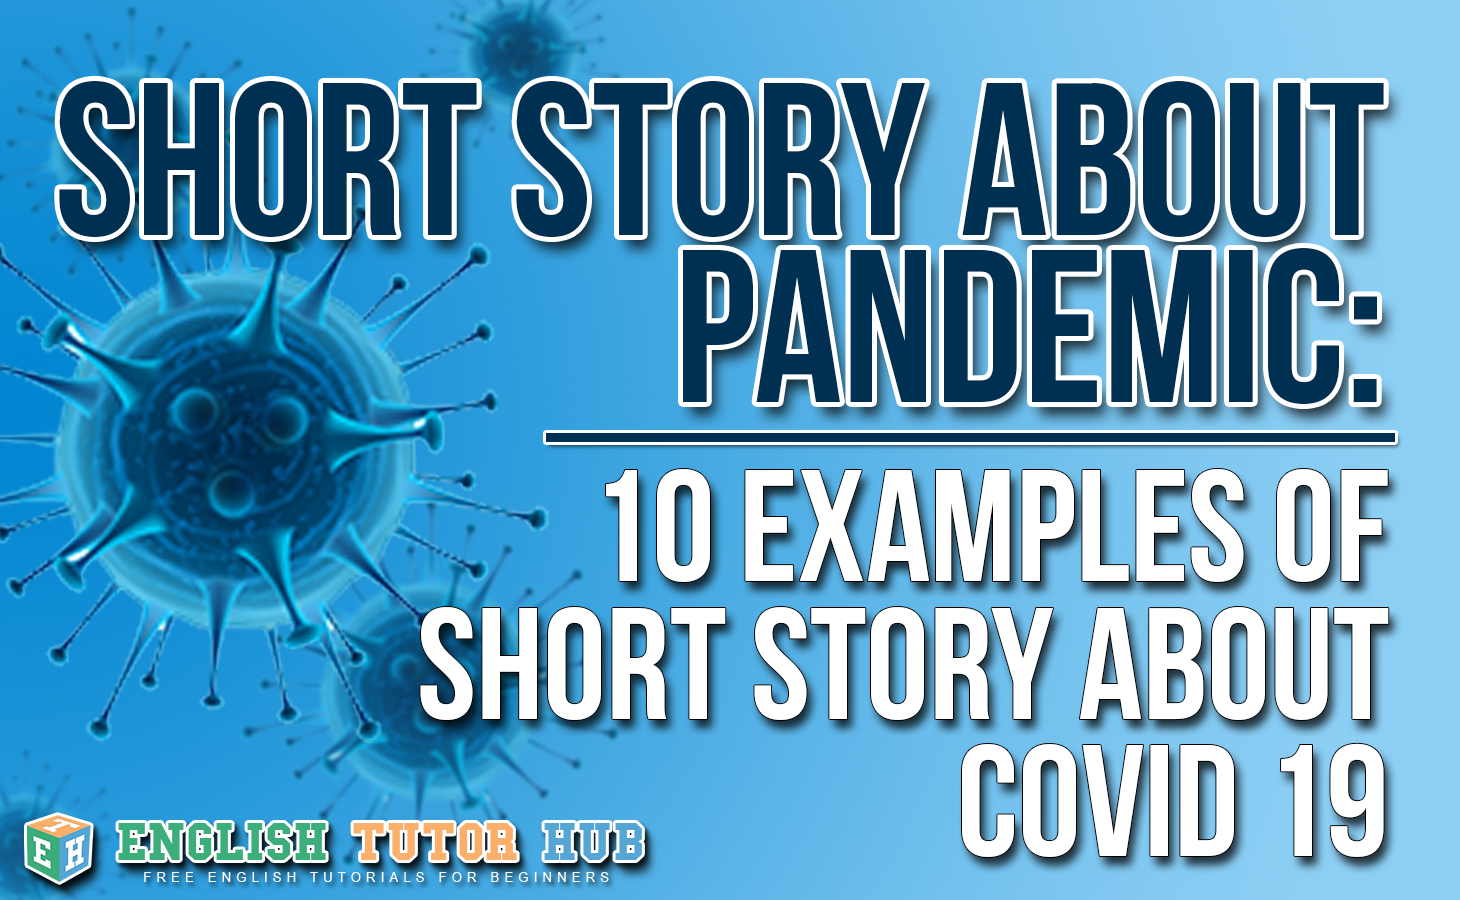 SHORT STORY ABOUT PANDEMIC - 10 EXAMPLES OF SHORT STORY ABOUT COVID 19